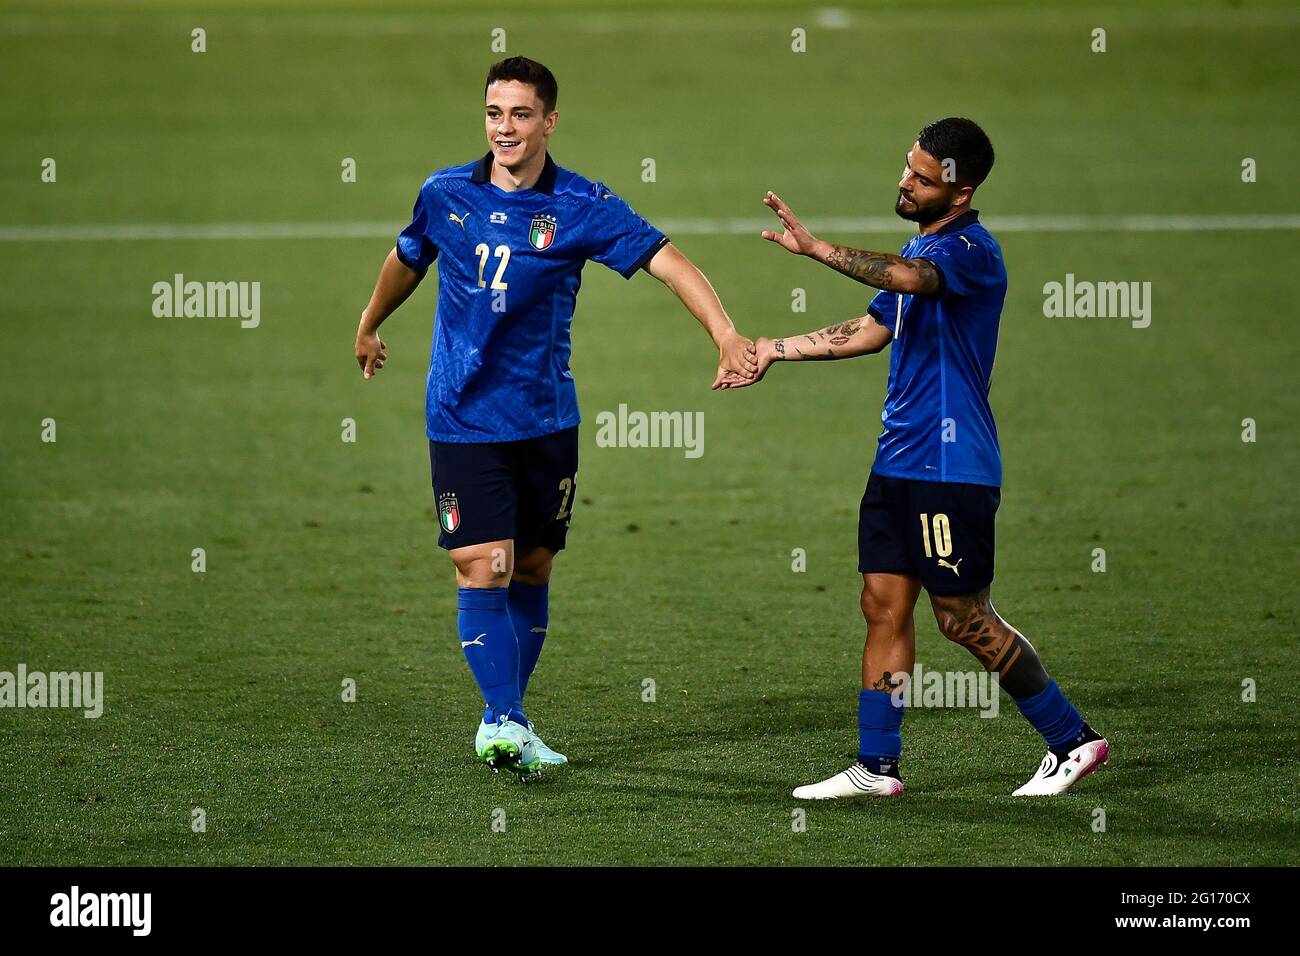 Bologna, Italy. 04 June 2021. Giacomo Raspadori (L) and Lorenzo Insigne of Italy are seen during the international friendly match between Italy and Czech Republic. Italy won 4-0 over Czech Republic. Credit: Nicolò Campo/Alamy Live News Stock Photo